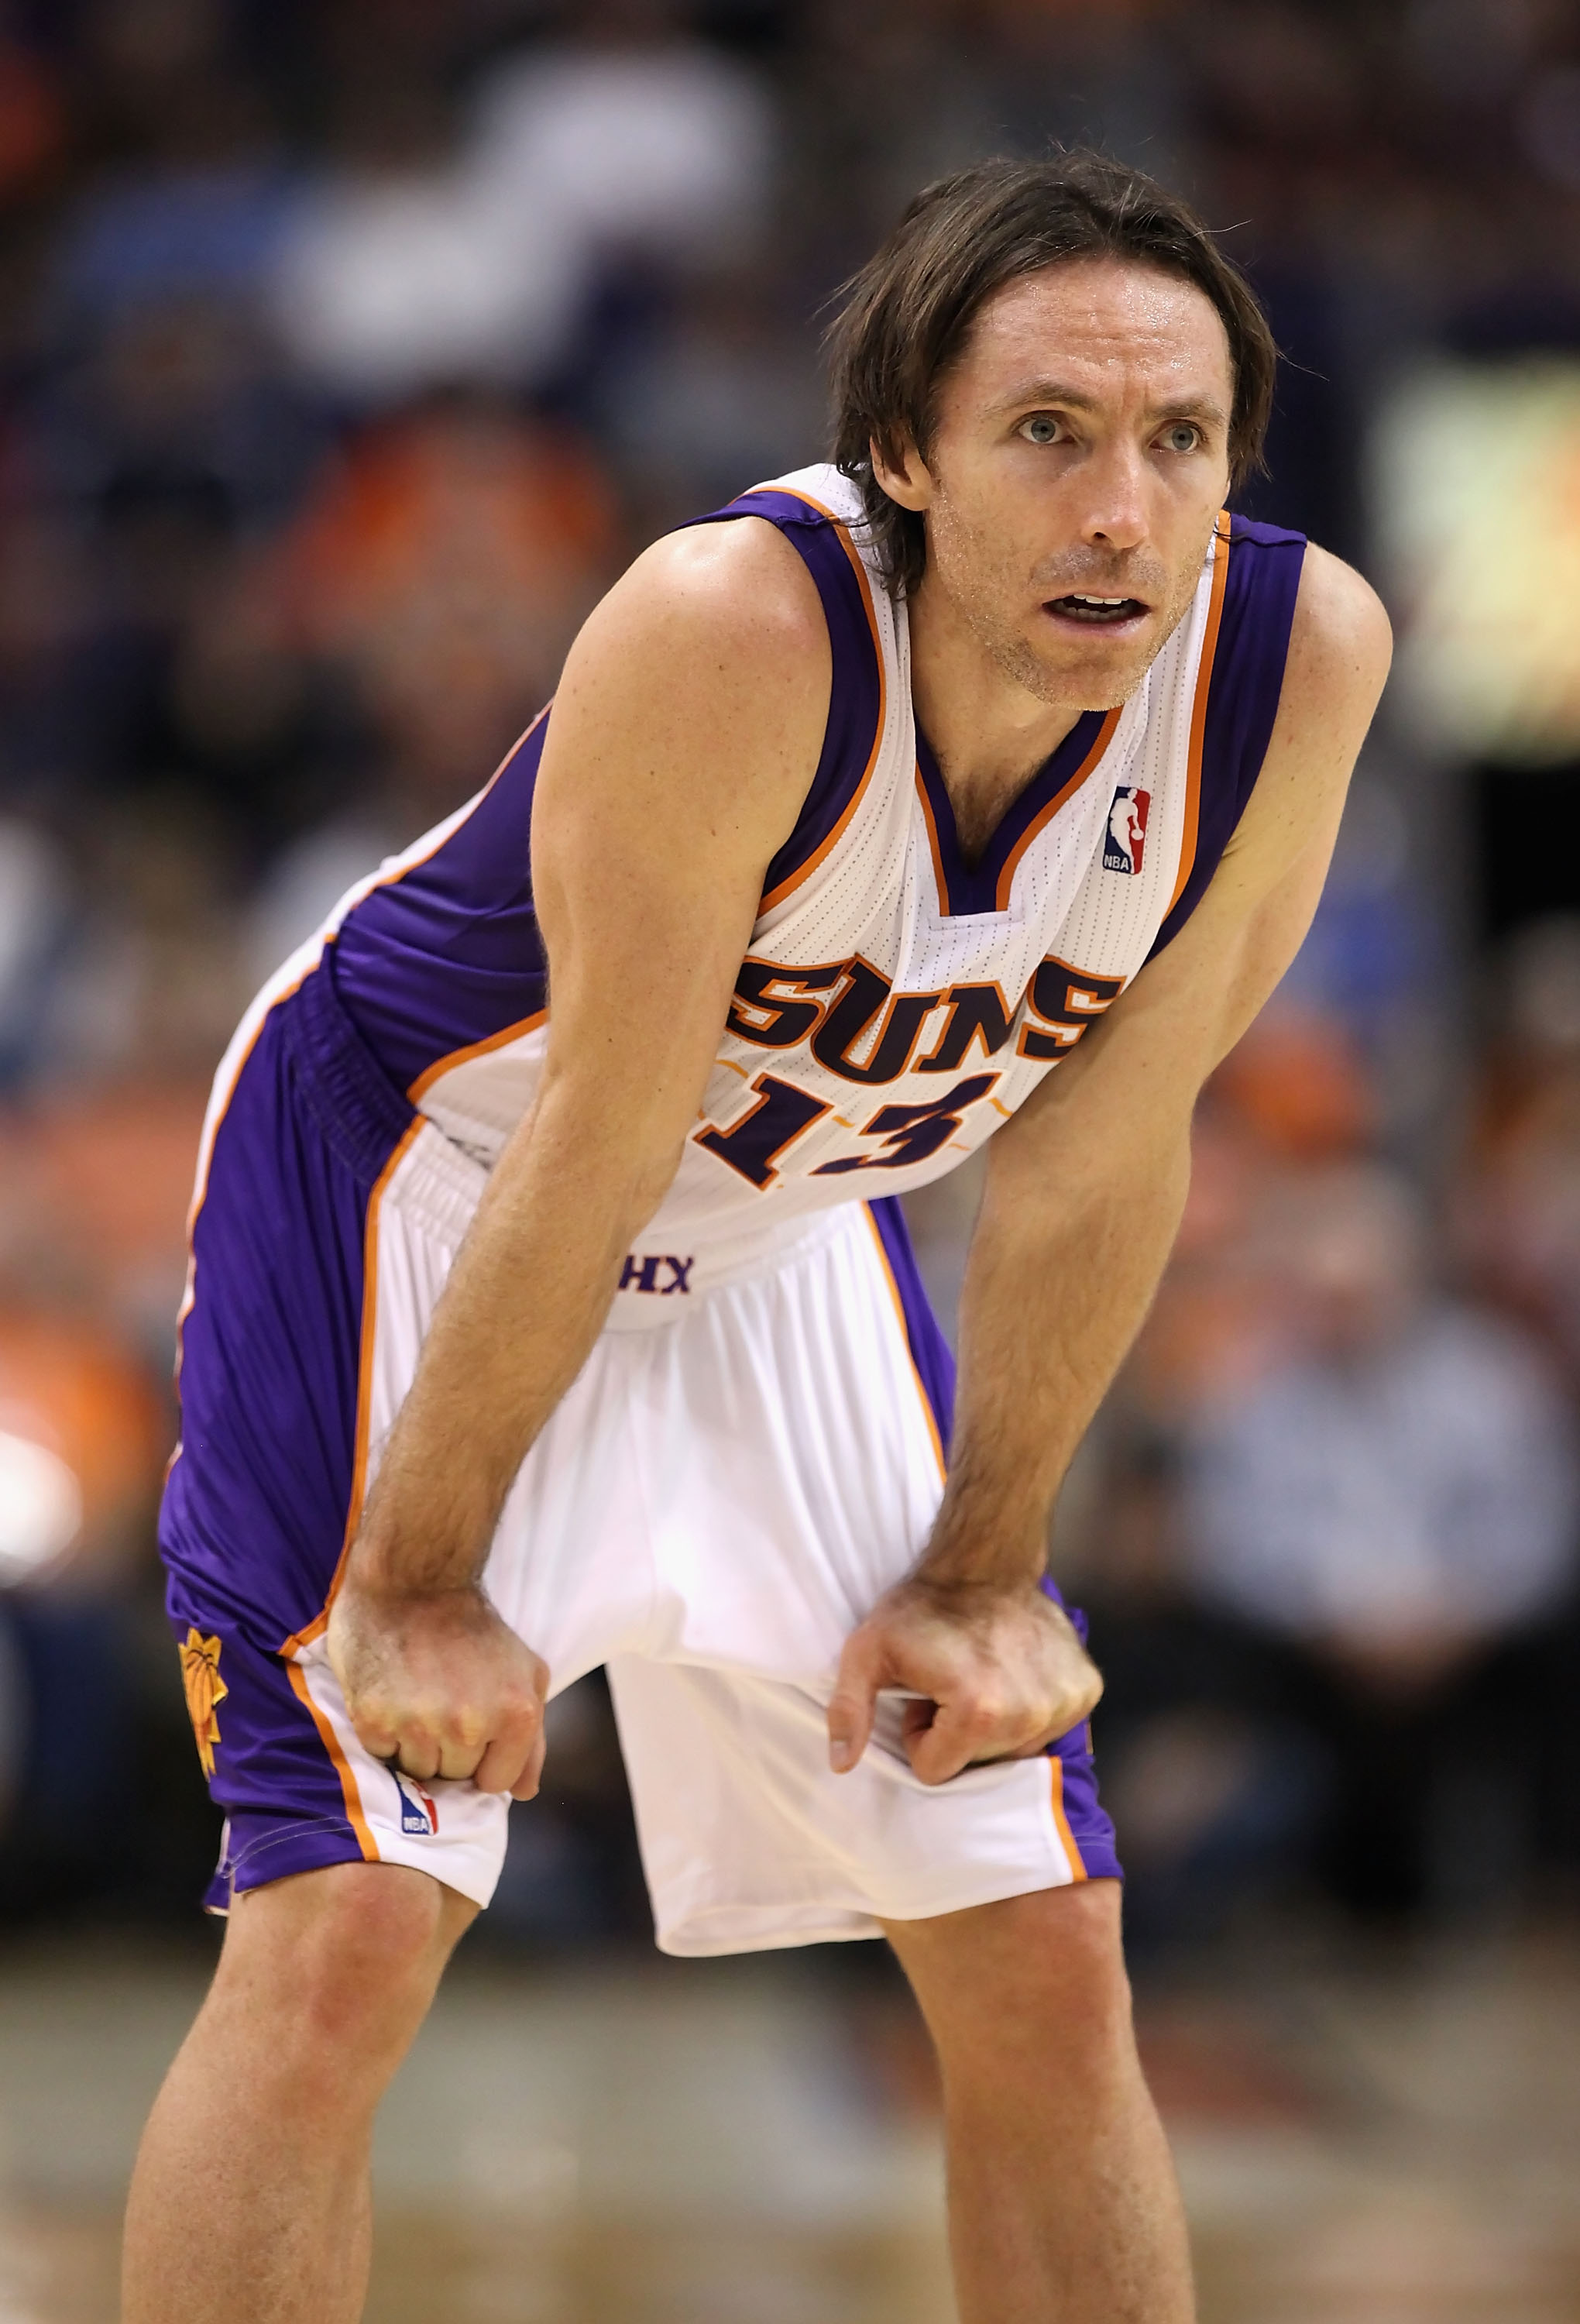 PHOENIX - DECEMBER 15:  Steve Nash #13 of the Phoenix Suns during the NBA game against the Minnesota Timberwolves at US Airways Center on December 15, 2010 in Phoenix, Arizona. NOTE TO USER: User expressly acknowledges and agrees that, by downloading and